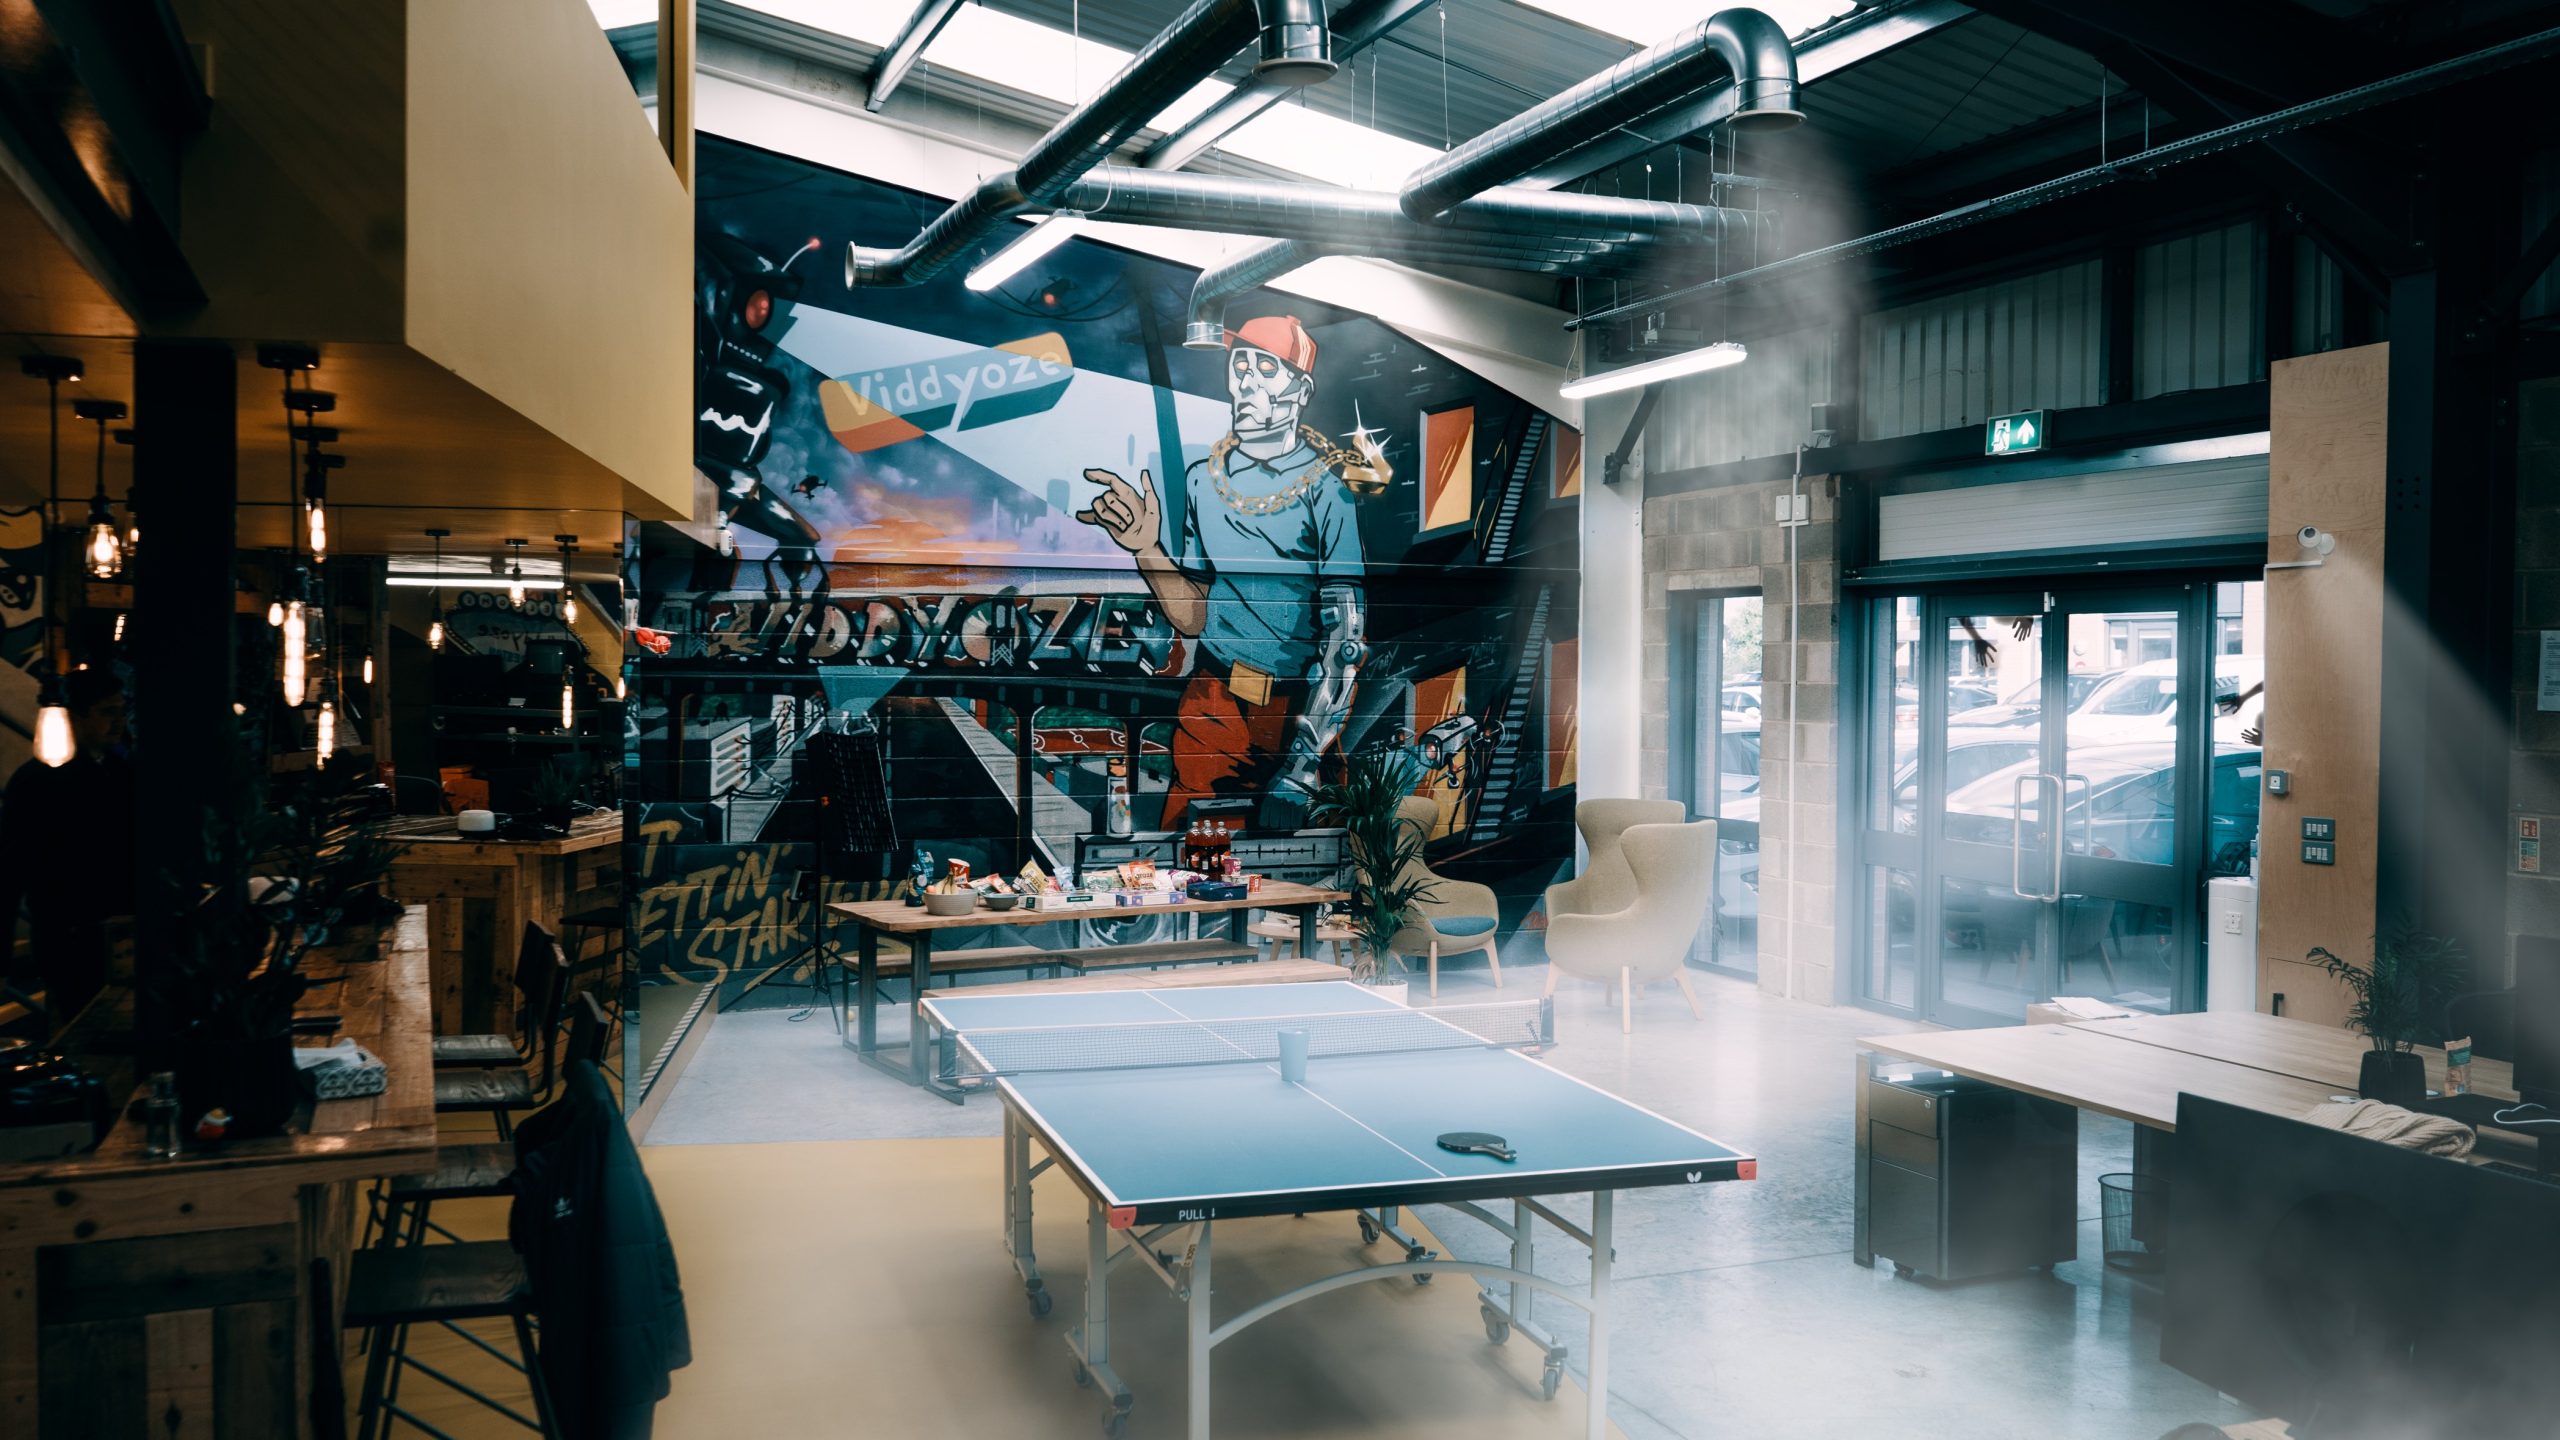 A shot of the office area including ping pong table and smokey Halloween effects over the image – used to support an article about creating video content for Halloween.